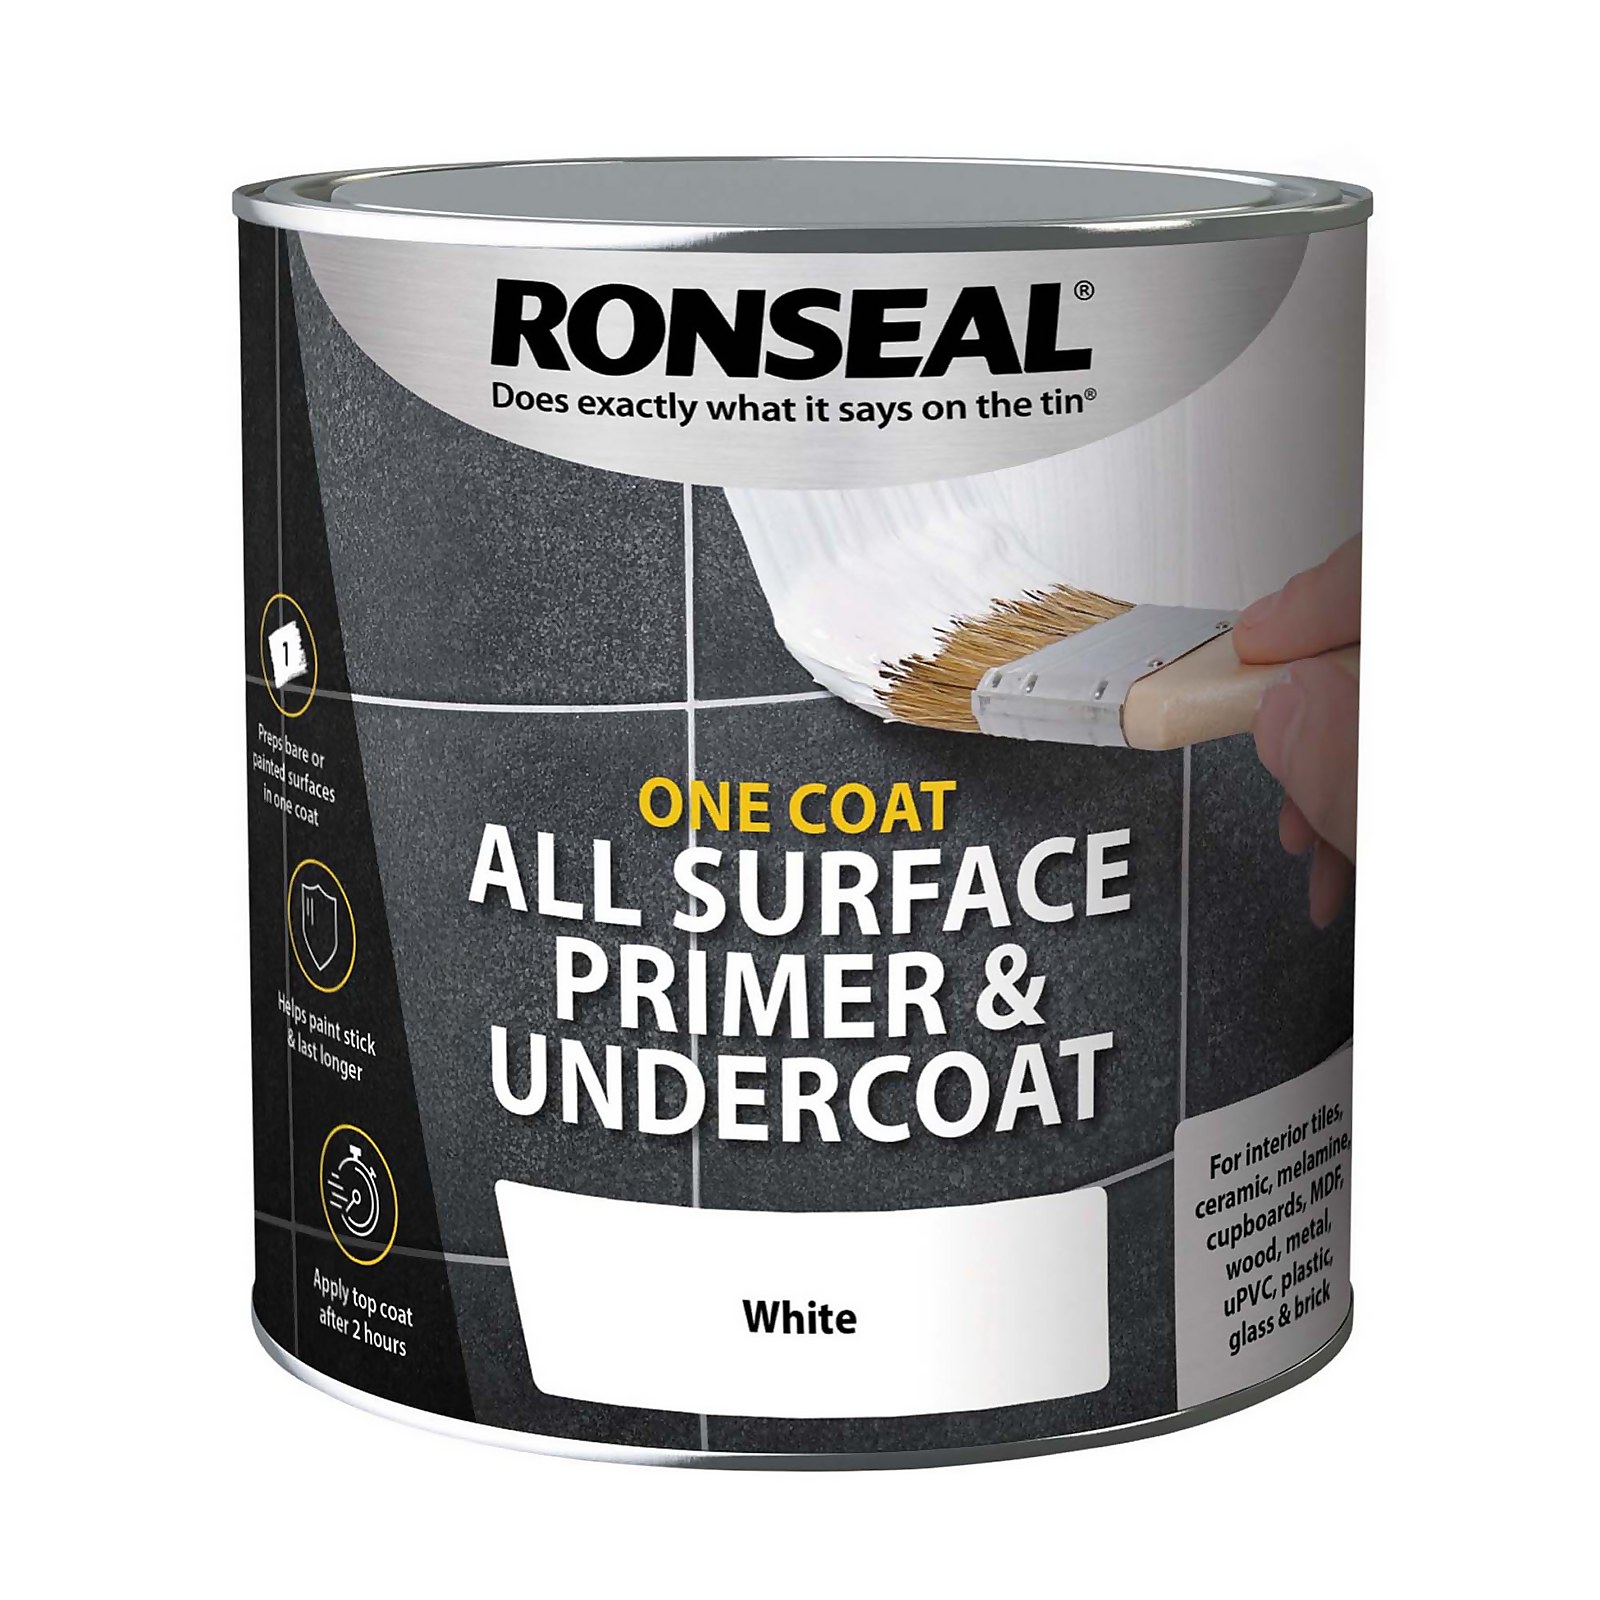 Ronseal One Coat All Surface Primer & Undercoat - 2.5L